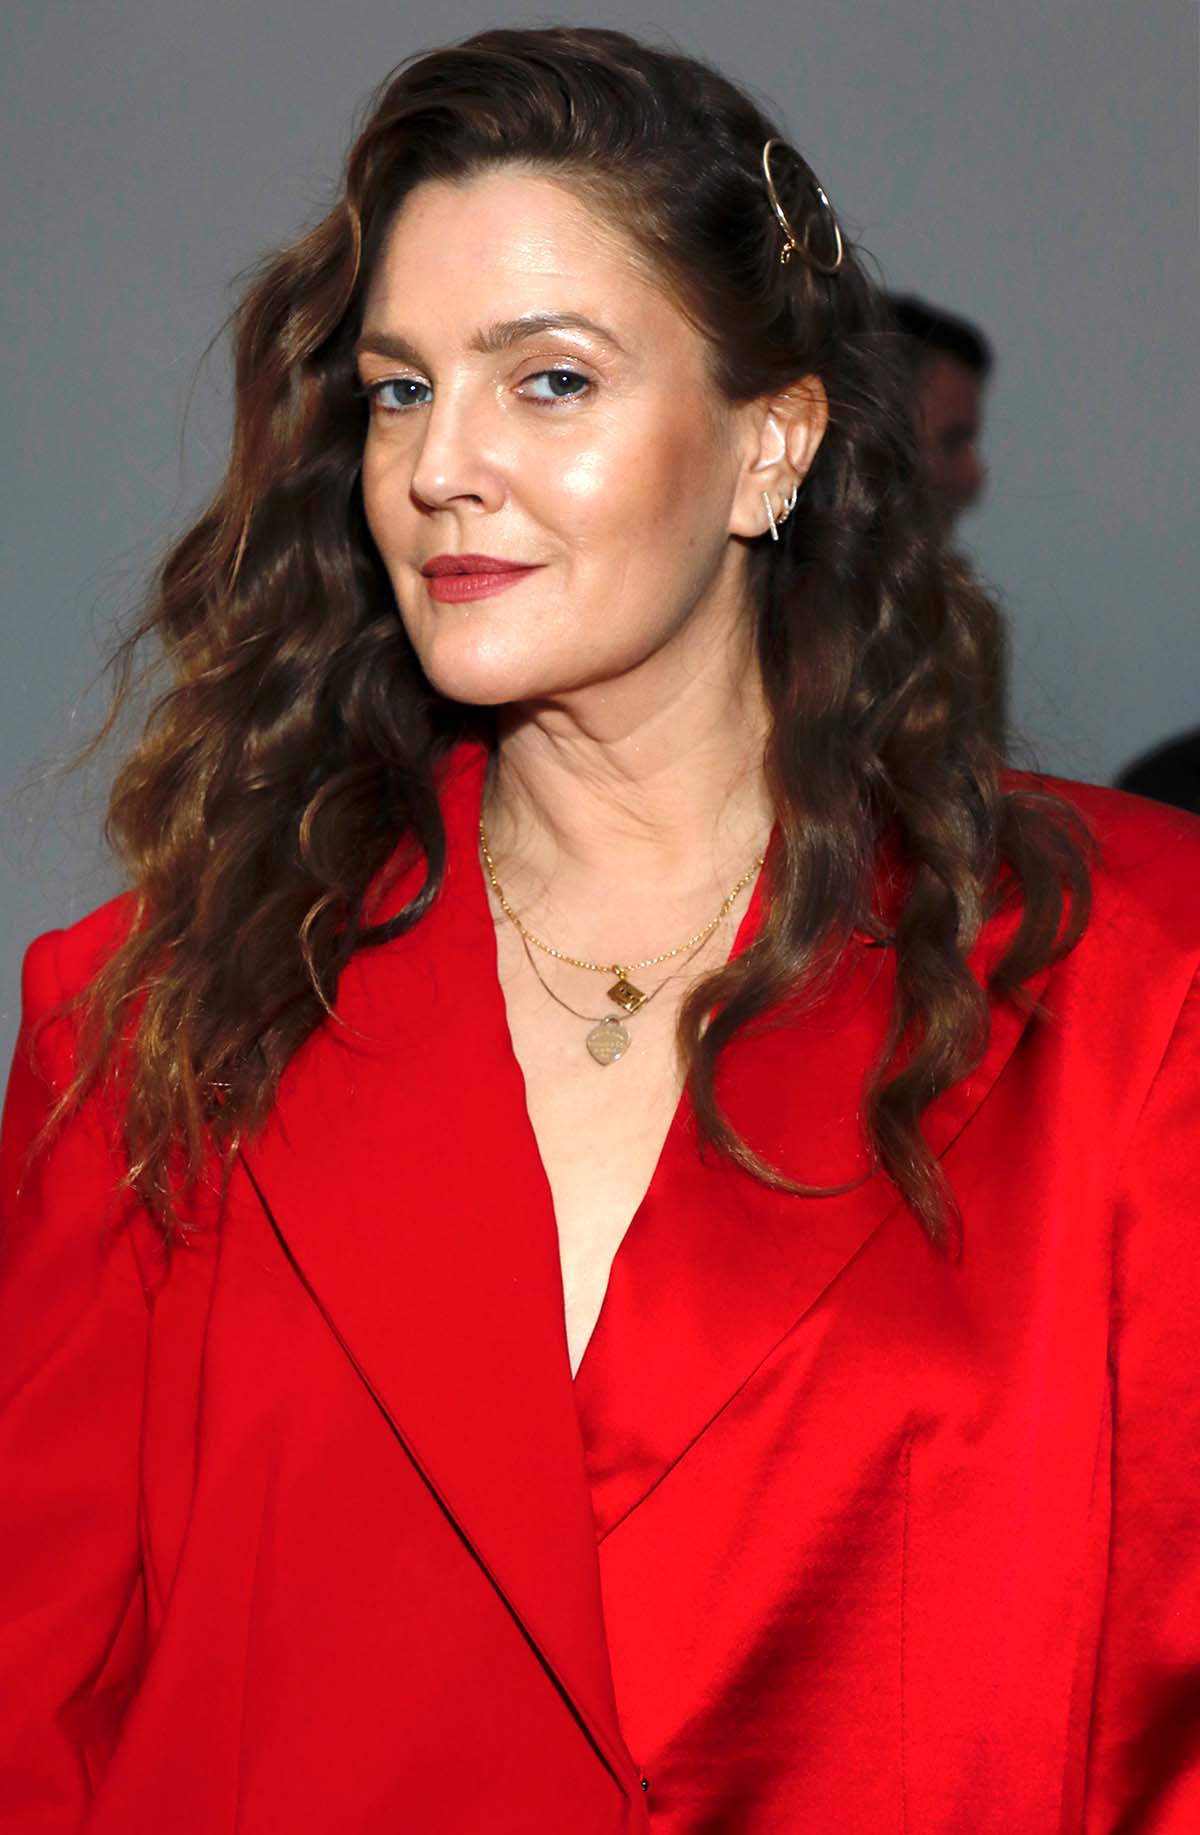 Drew Barrymore Show: March 2021 Drew Barrymore's Sage Green Air